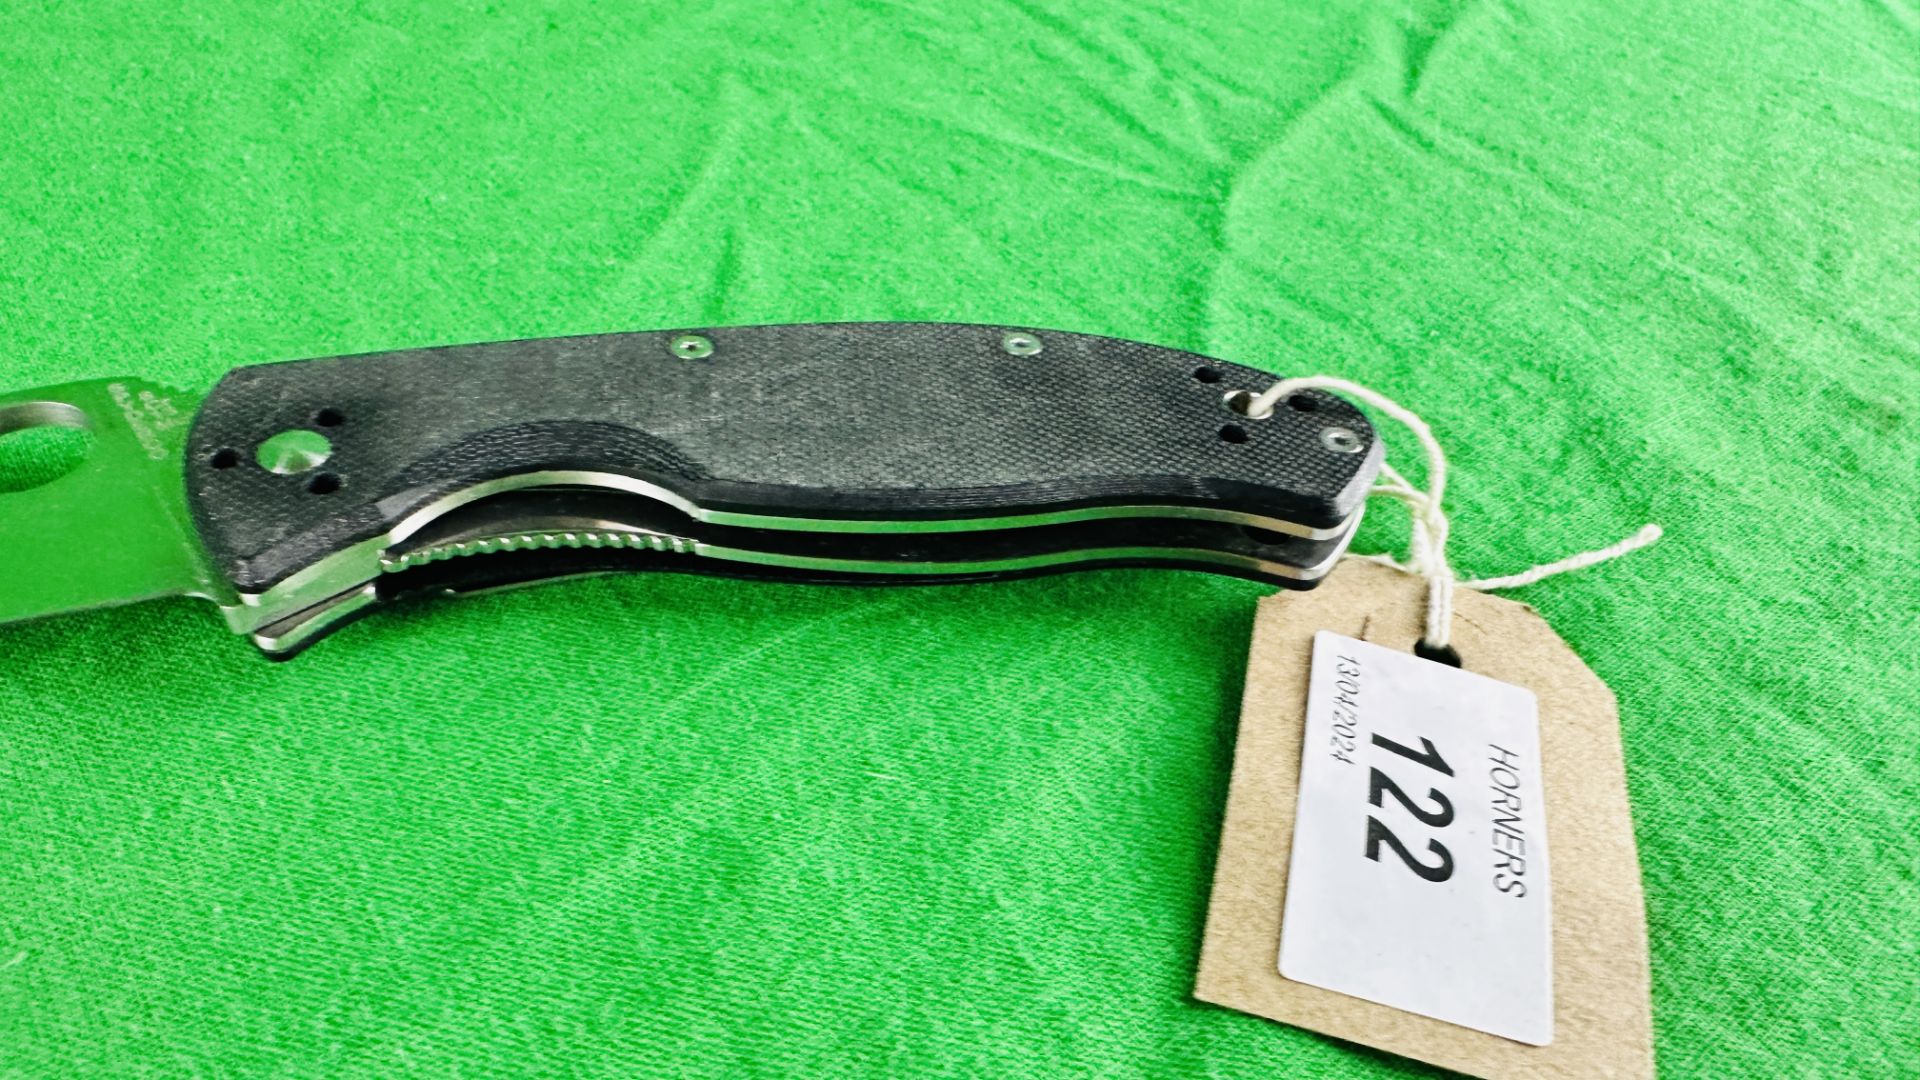 SPYDERCO TENACIOUS C122GP FOLDING POCKET LOCK KNIFE - NO POSTAGE OR PACKING AVAILABLE - Image 4 of 6